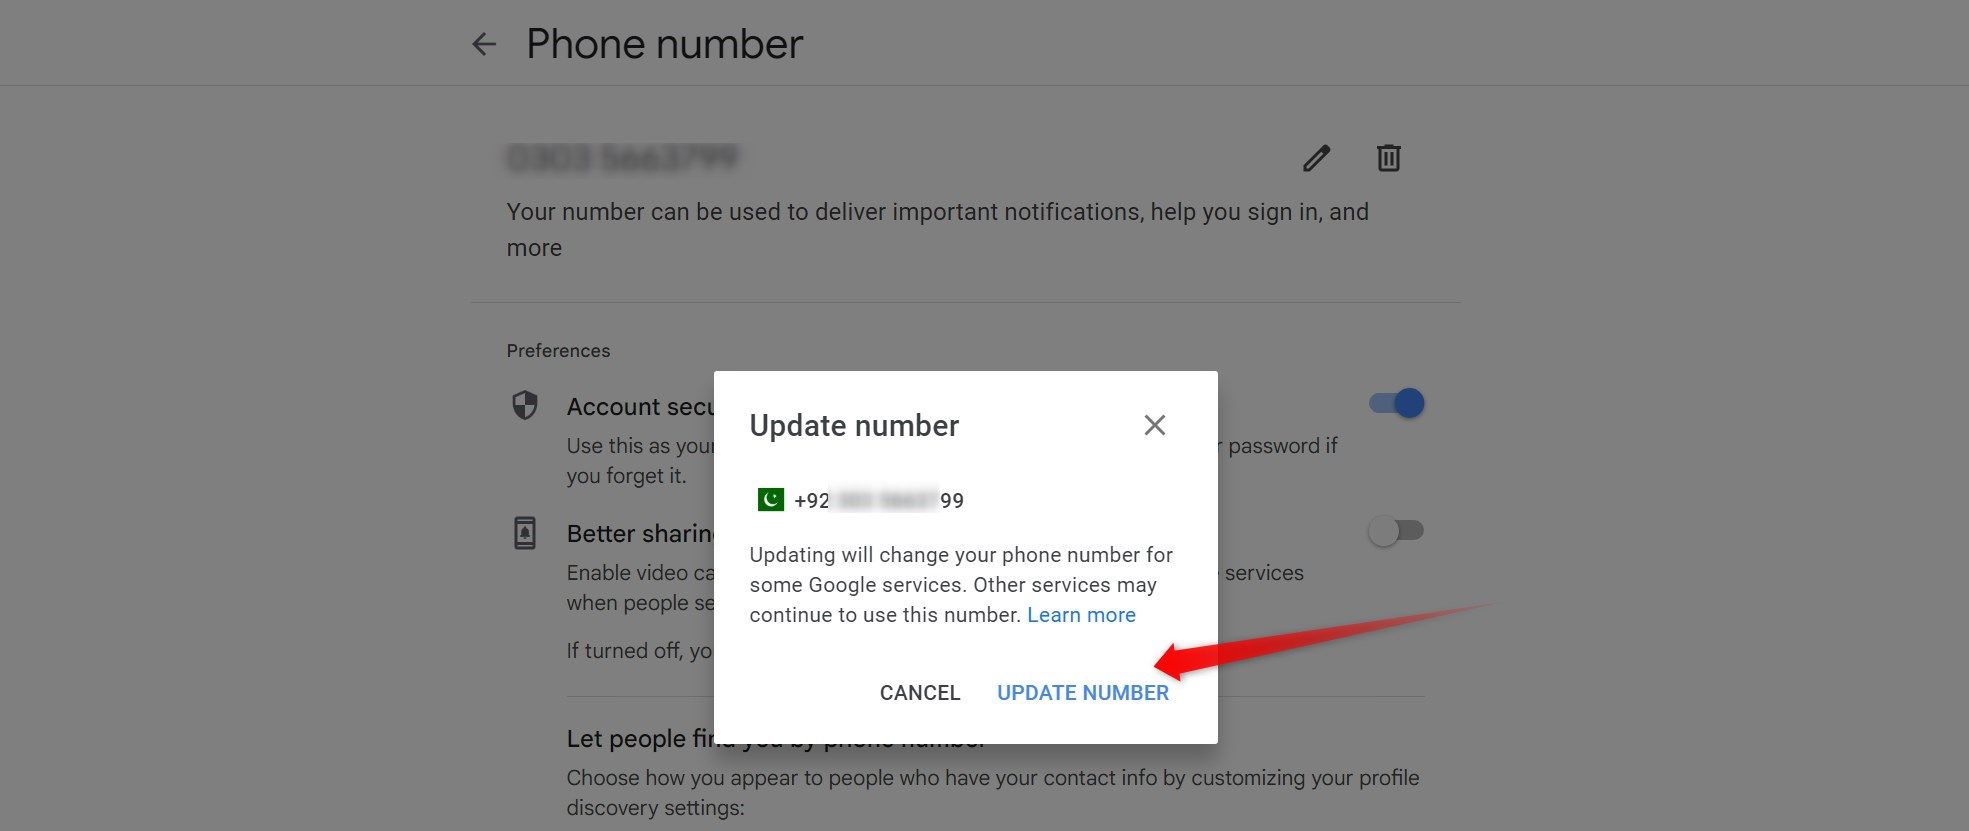 Clicking on the update number to update a phone number in Google settings-1